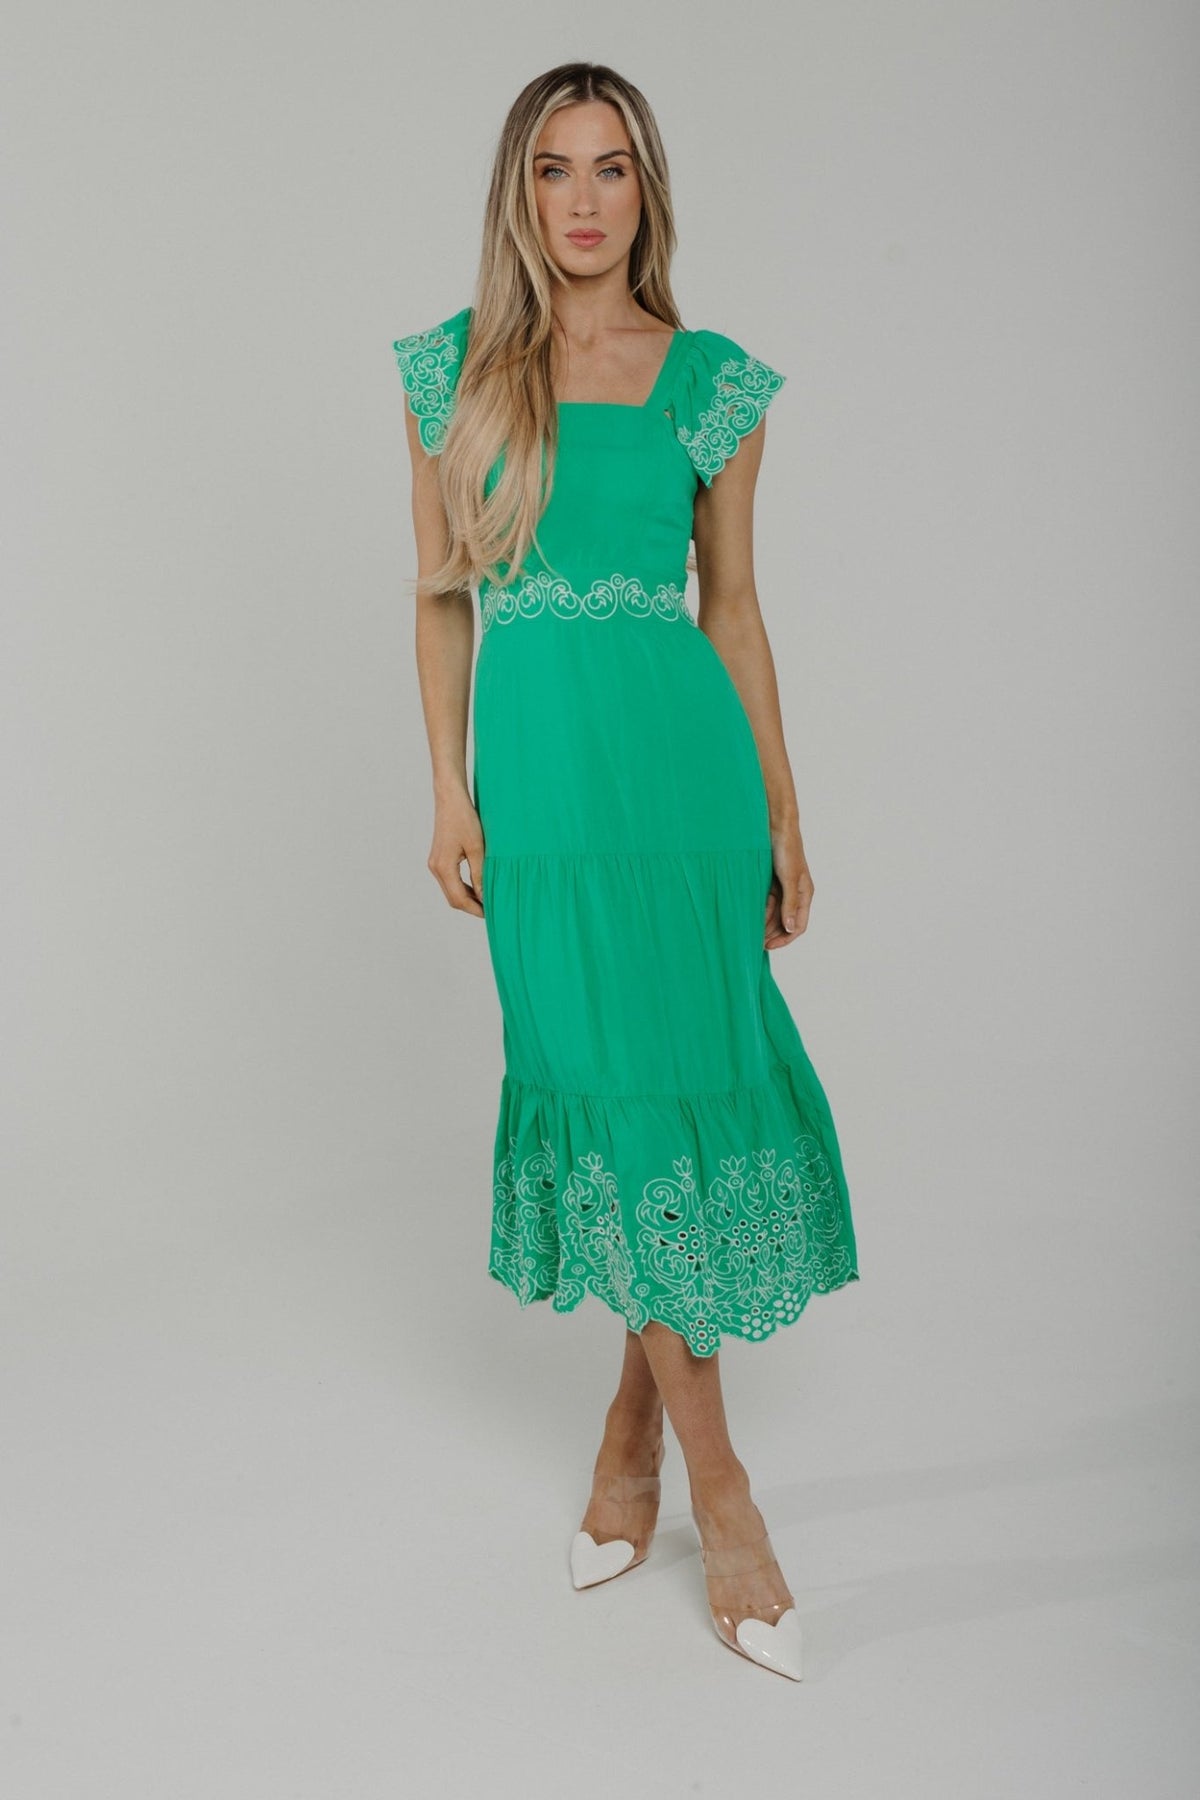 Sally Embroidered Detail Midi Dress In Green - The Walk in Wardrobe